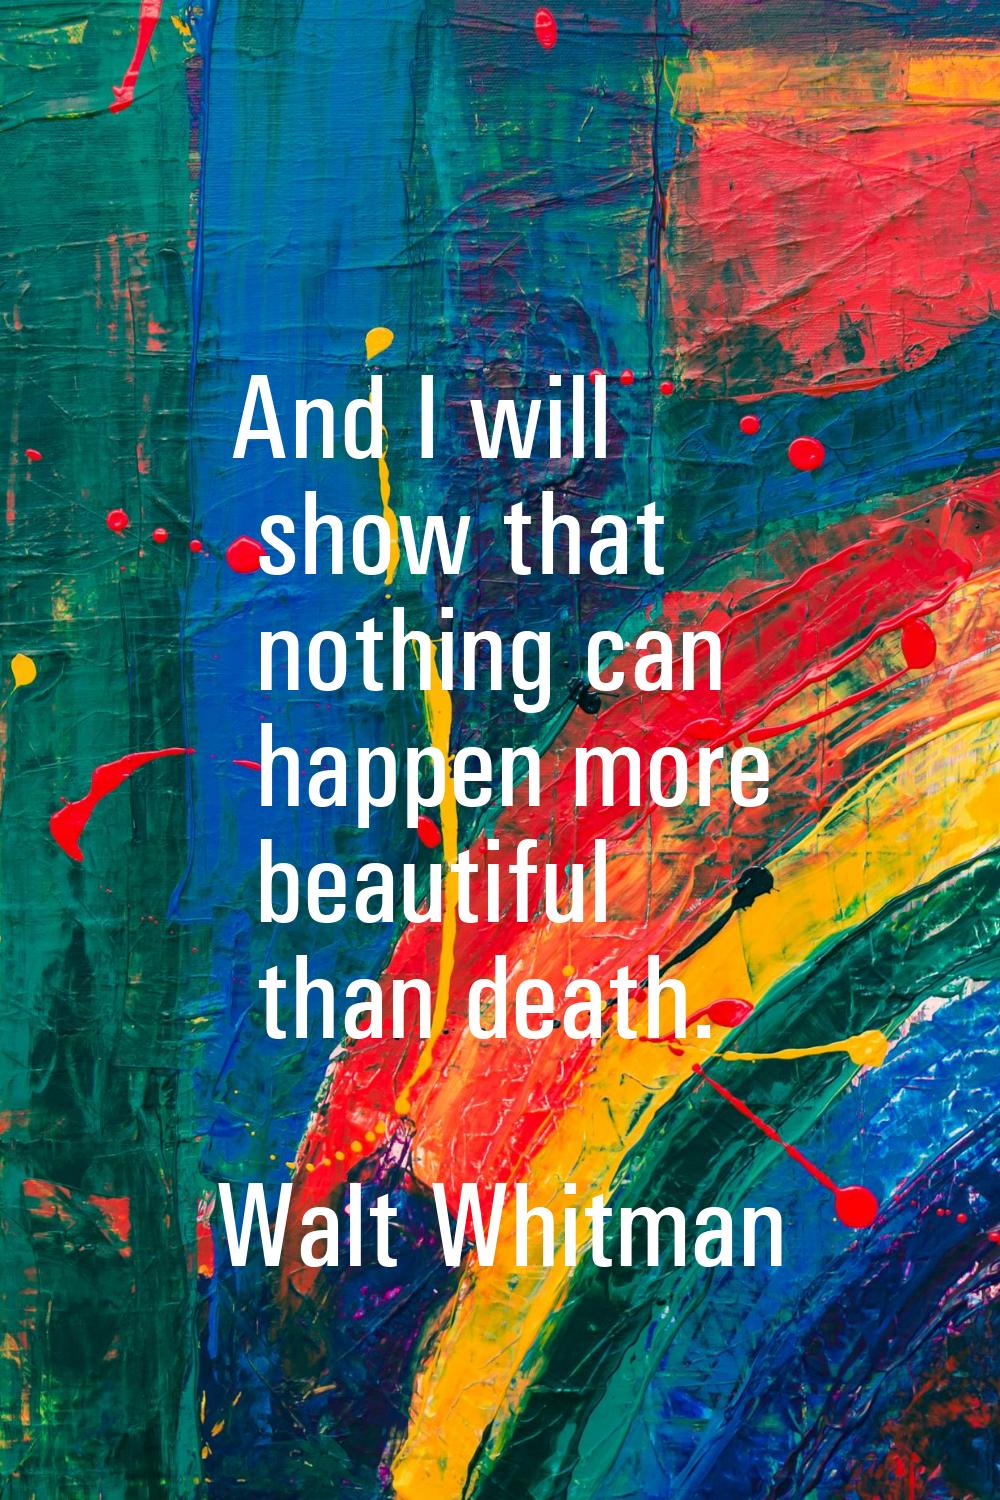 And I will show that nothing can happen more beautiful than death.